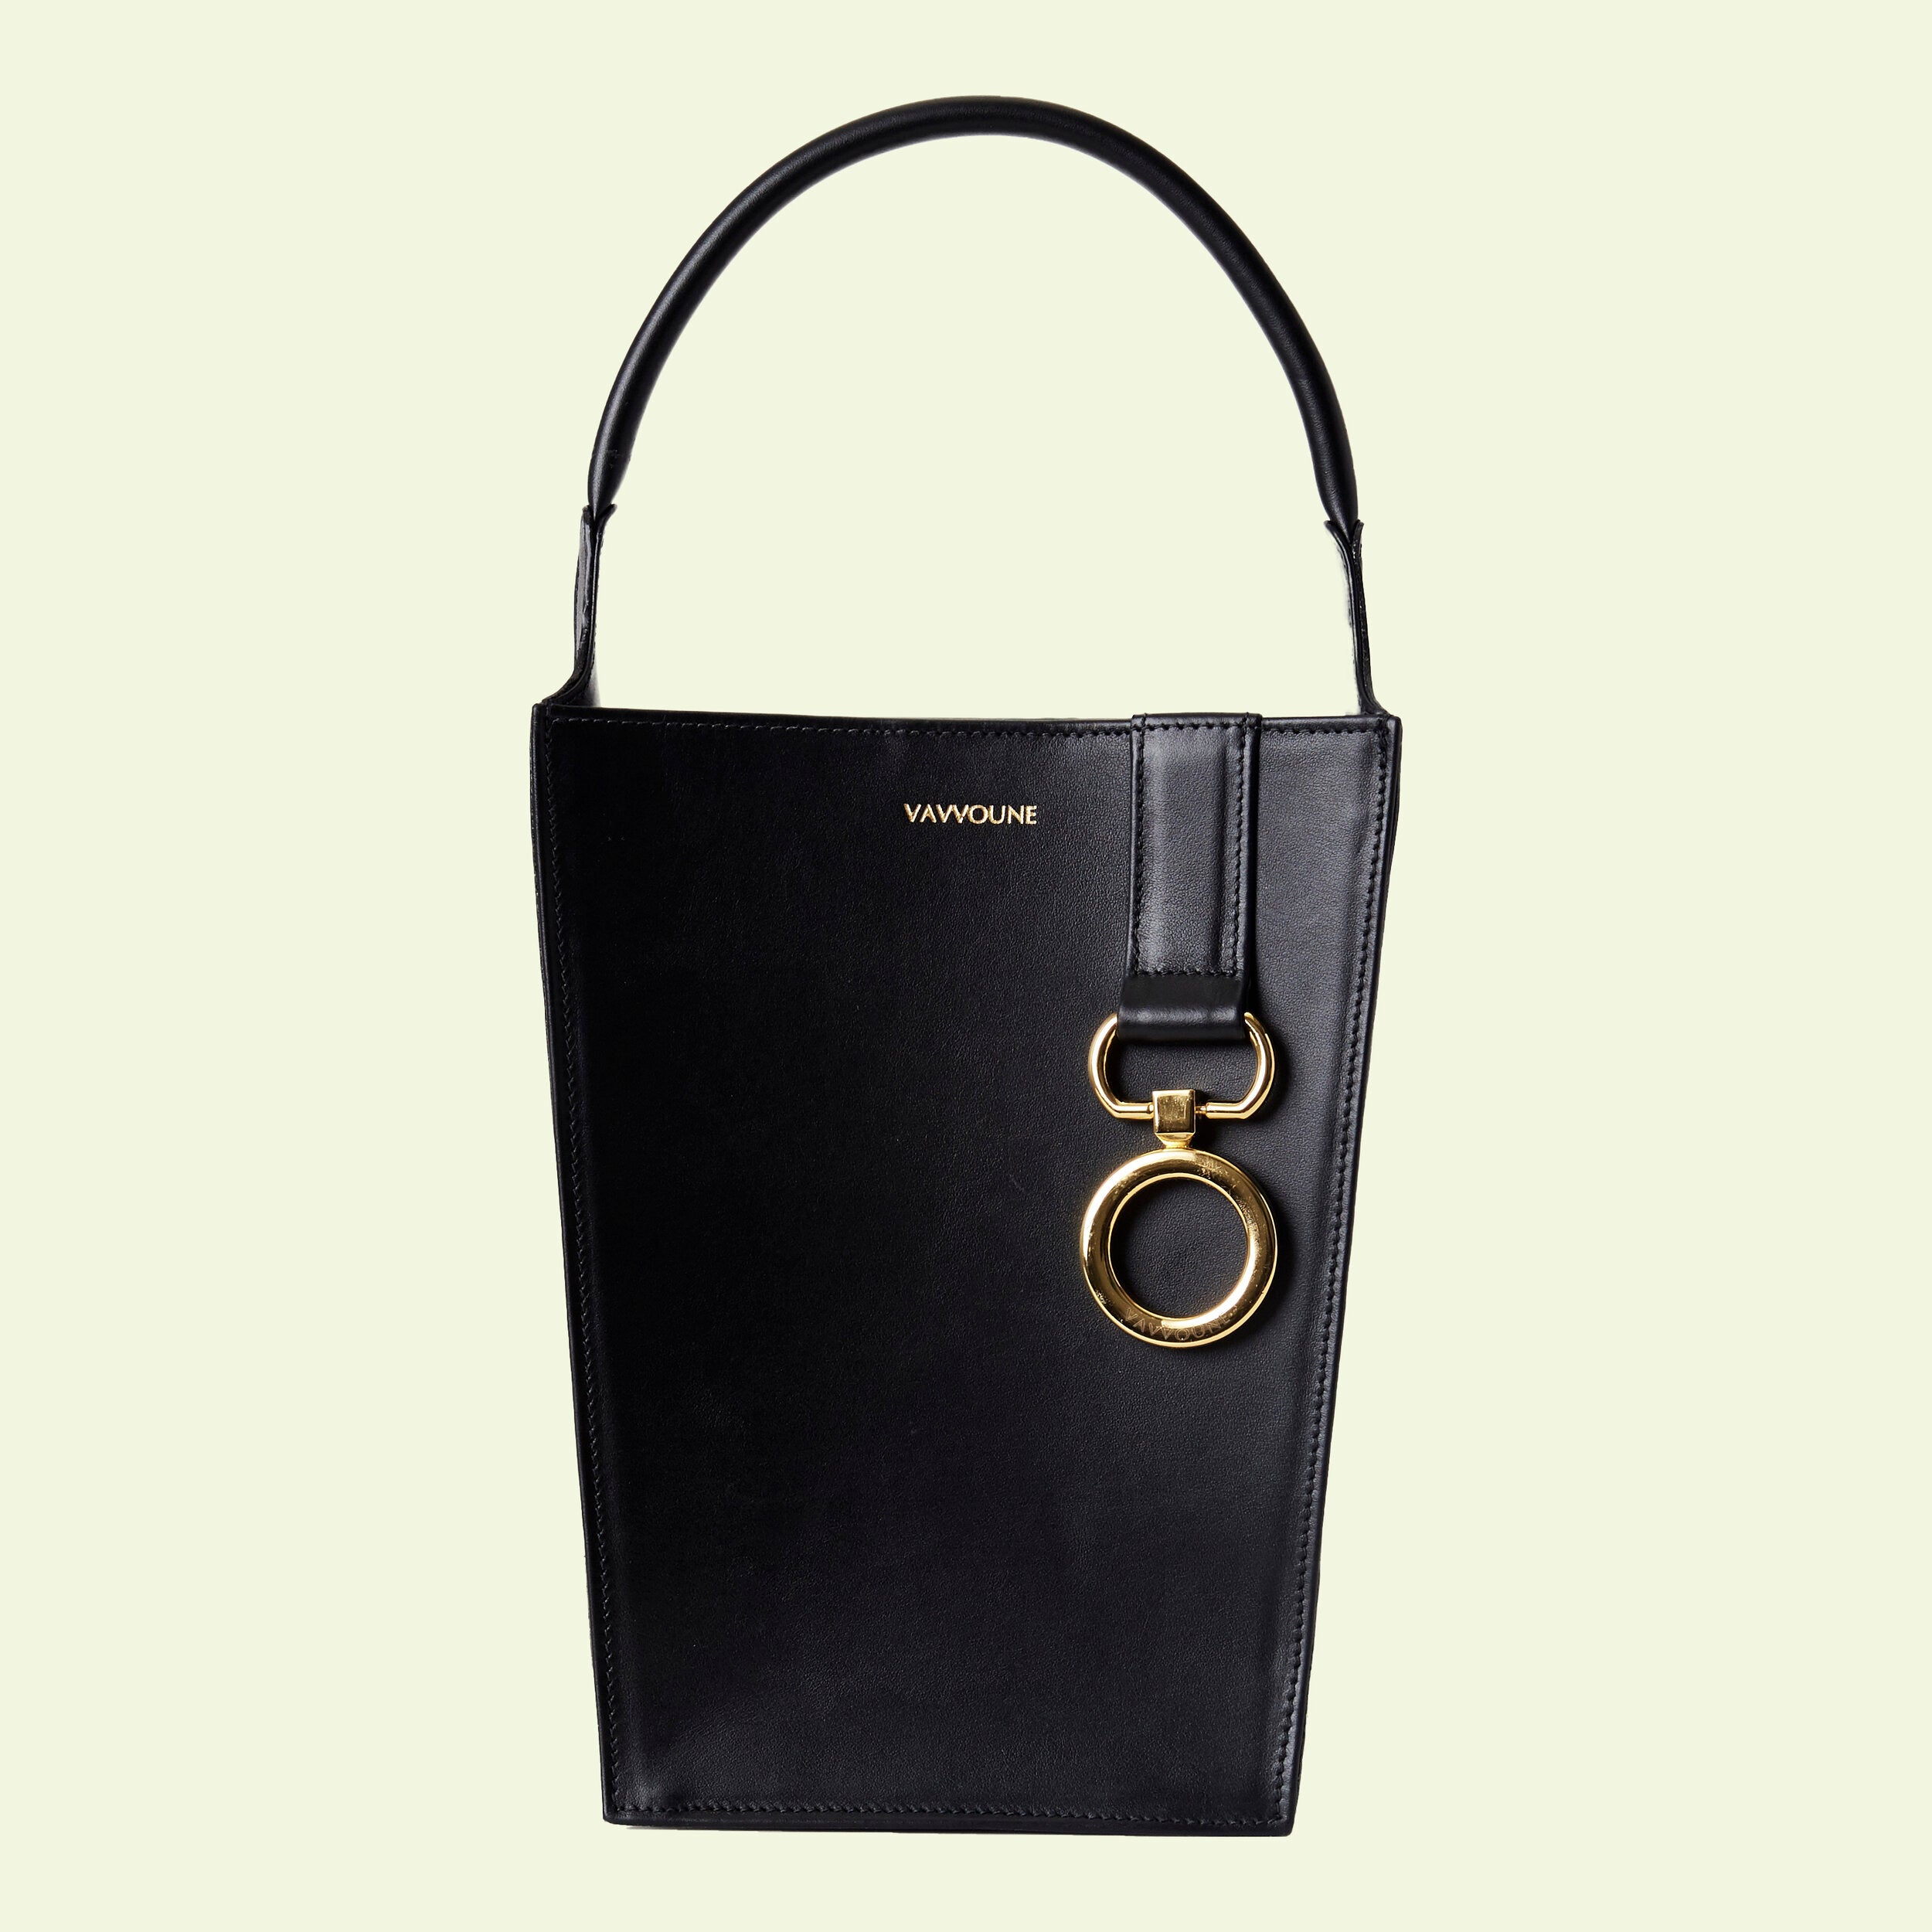 Shop 10 Mother's Day Gifts For The Mom Who Loves Designer Bags